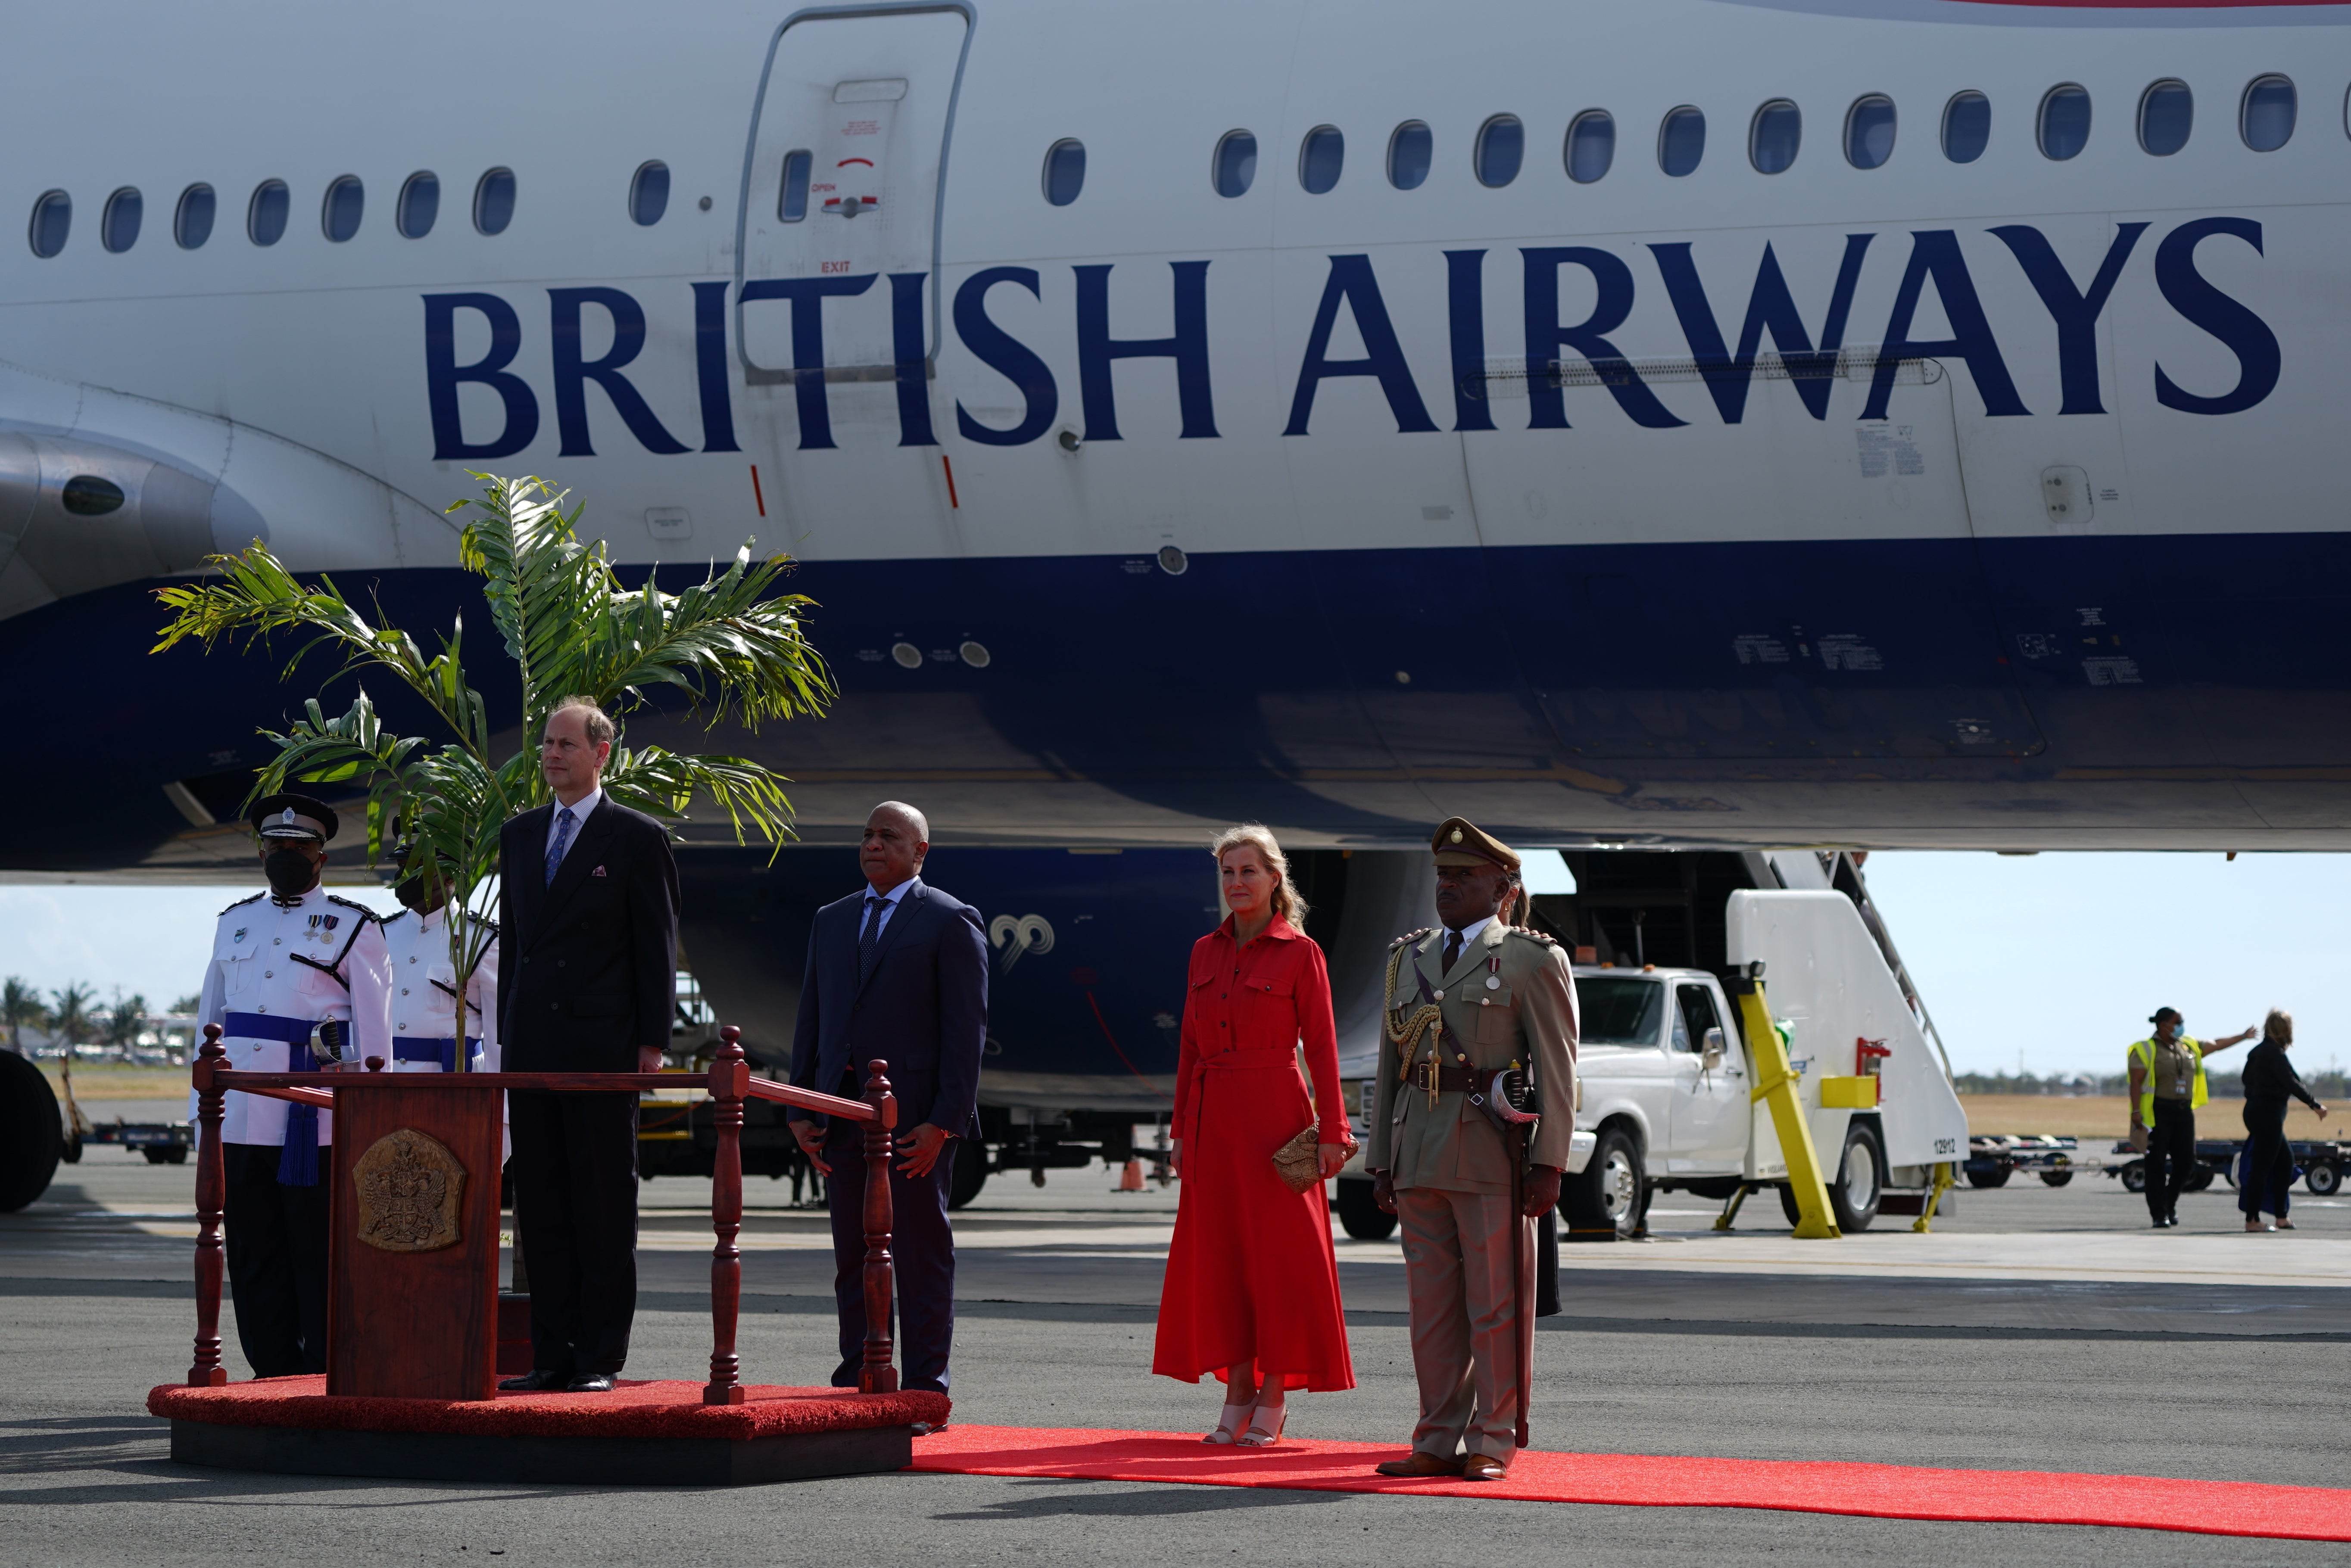 The Countess of Wessex, who is accompanying her husband the Earl of Wessex, arrives at Hewanorra International Airport in St Lucia for the start of their visit to the Caribbean, to mark the Queen’s Platinum Jubilee. Picture date: Friday April 22, 2022 (Joe Giddens/PA)